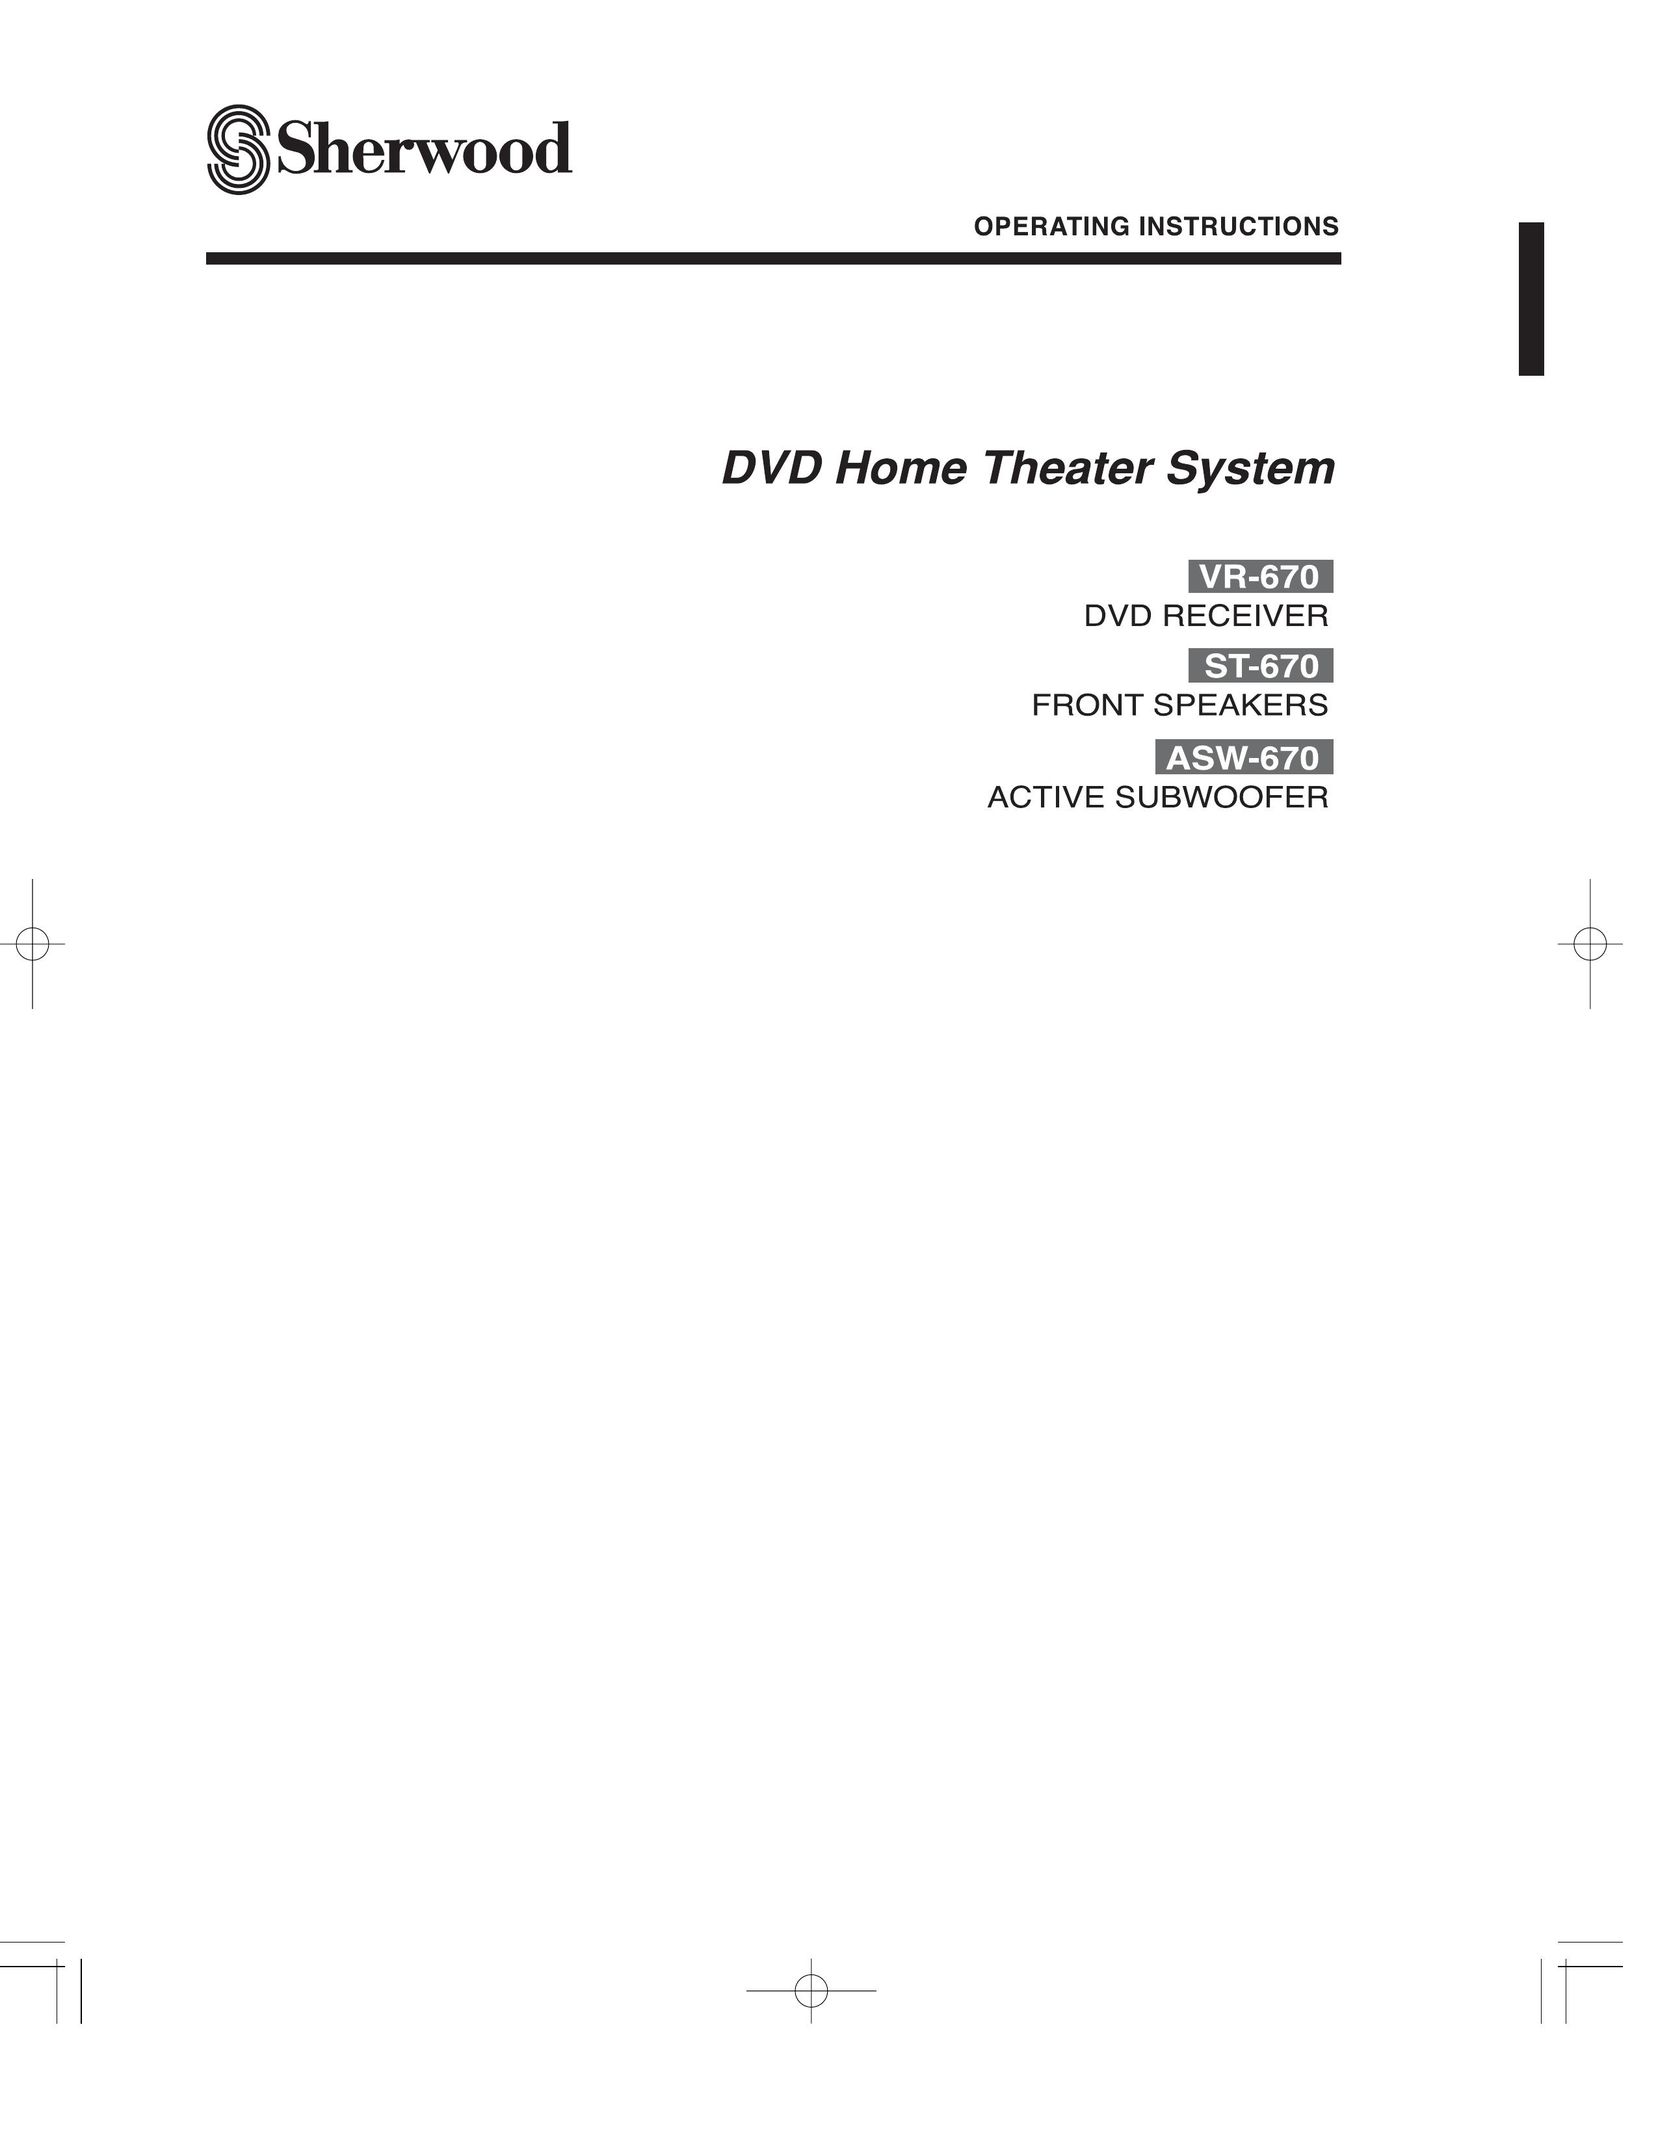 Sherwood ASW-670 Home Theater System User Manual